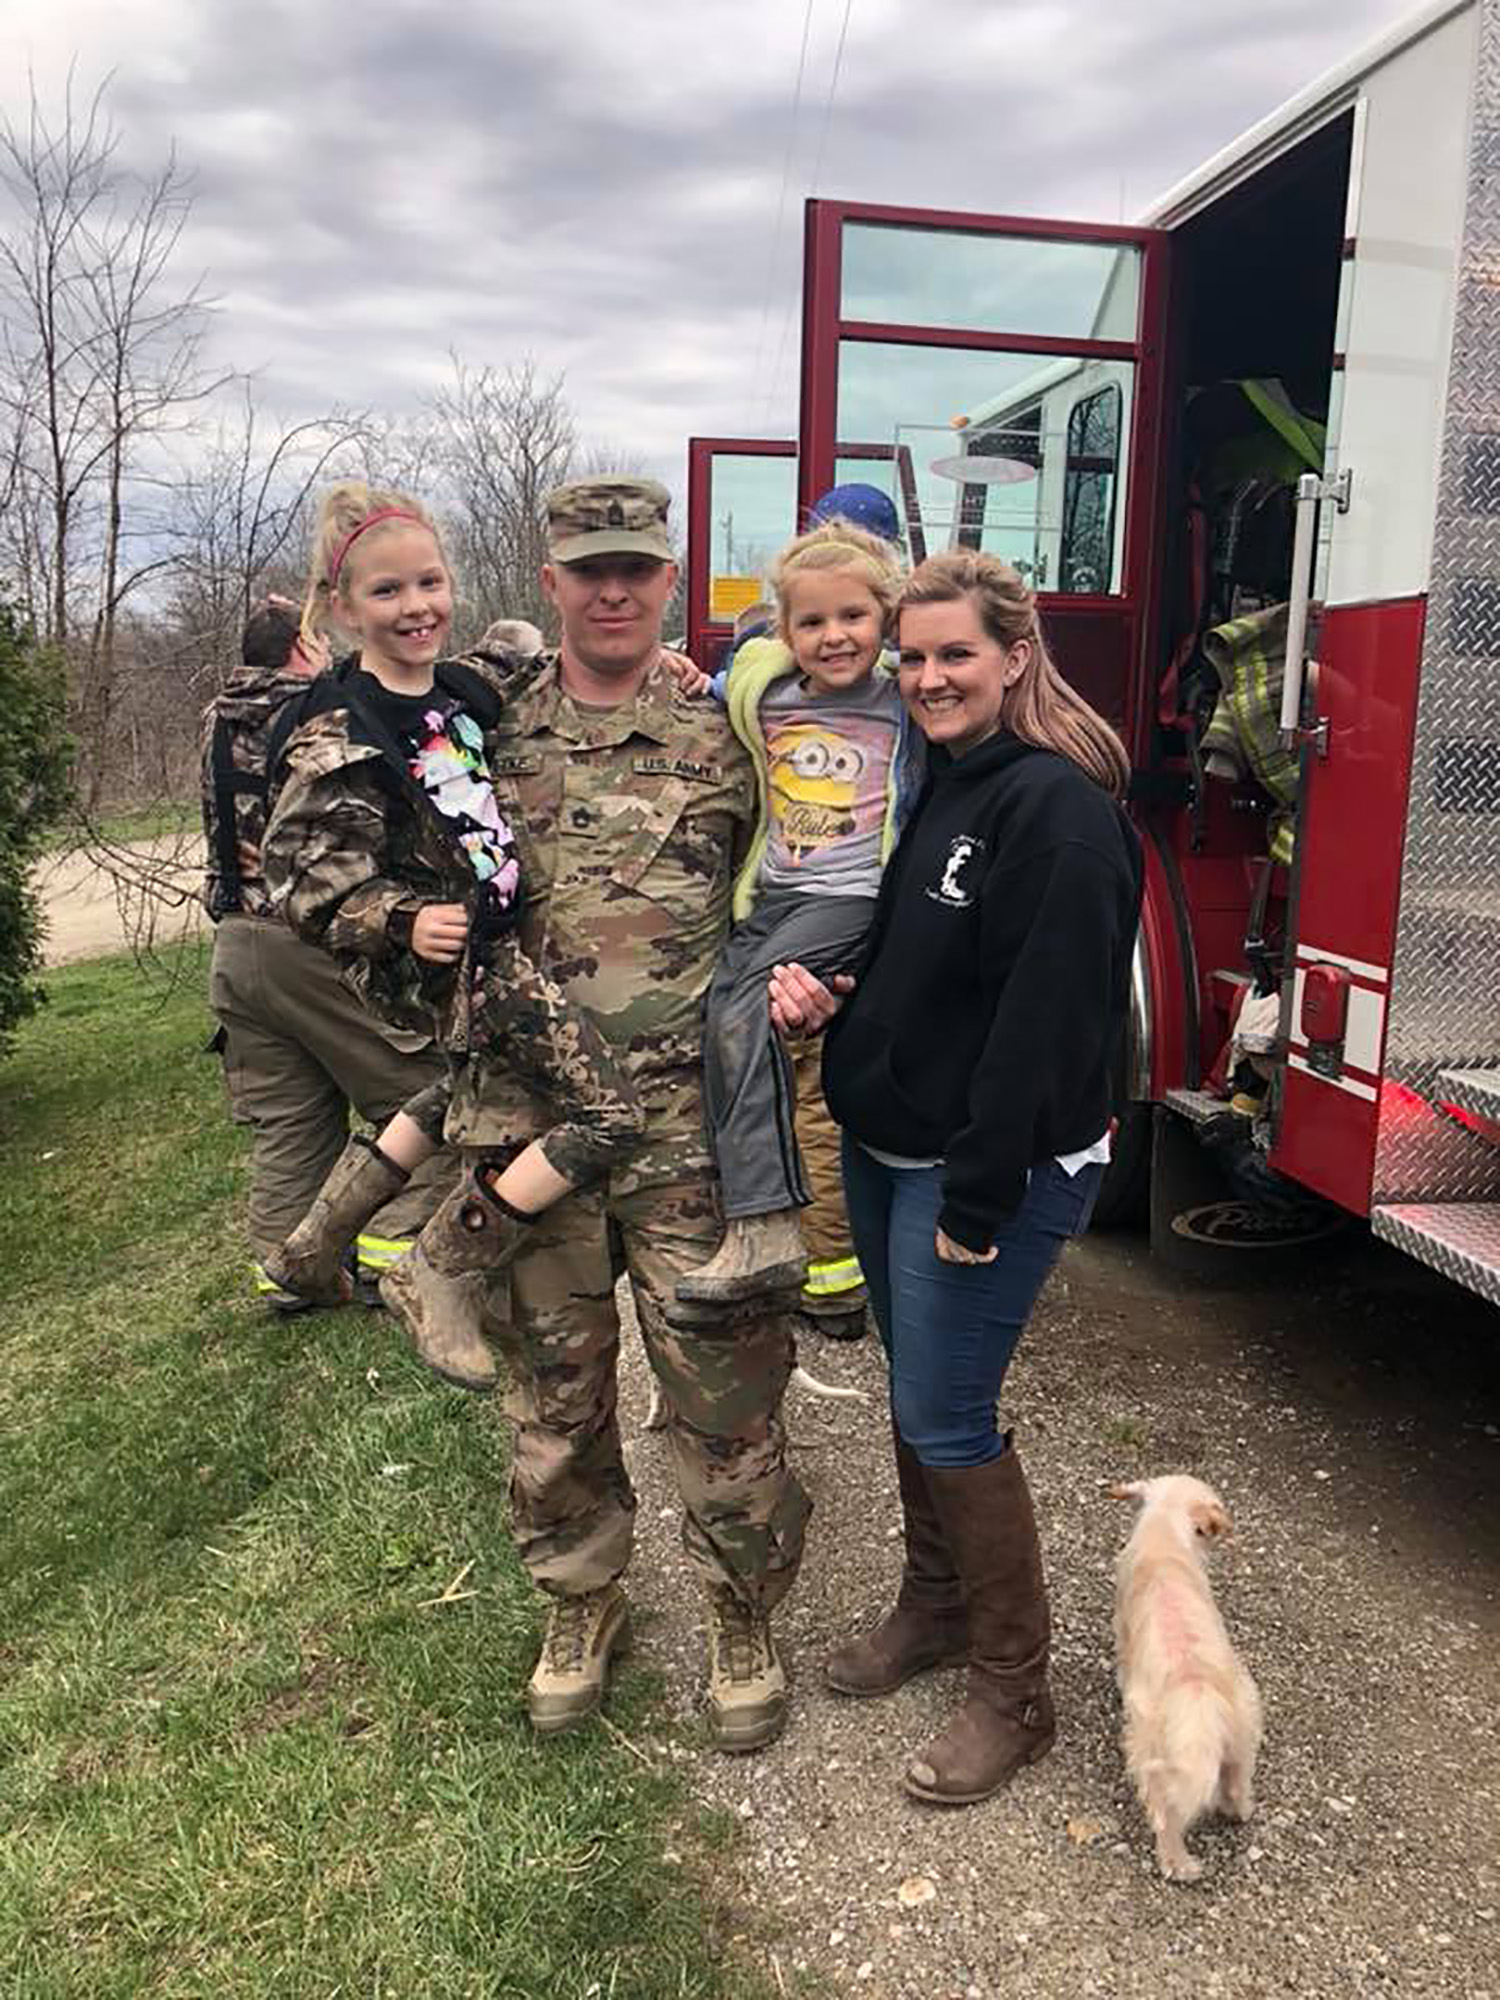 PHOTO: Sgt. First Class Terry Gottke and his wife, Brittany, surprised their daughter with his homecoming Saturday. Terry arrived in a firetruck because he is a firefighter.